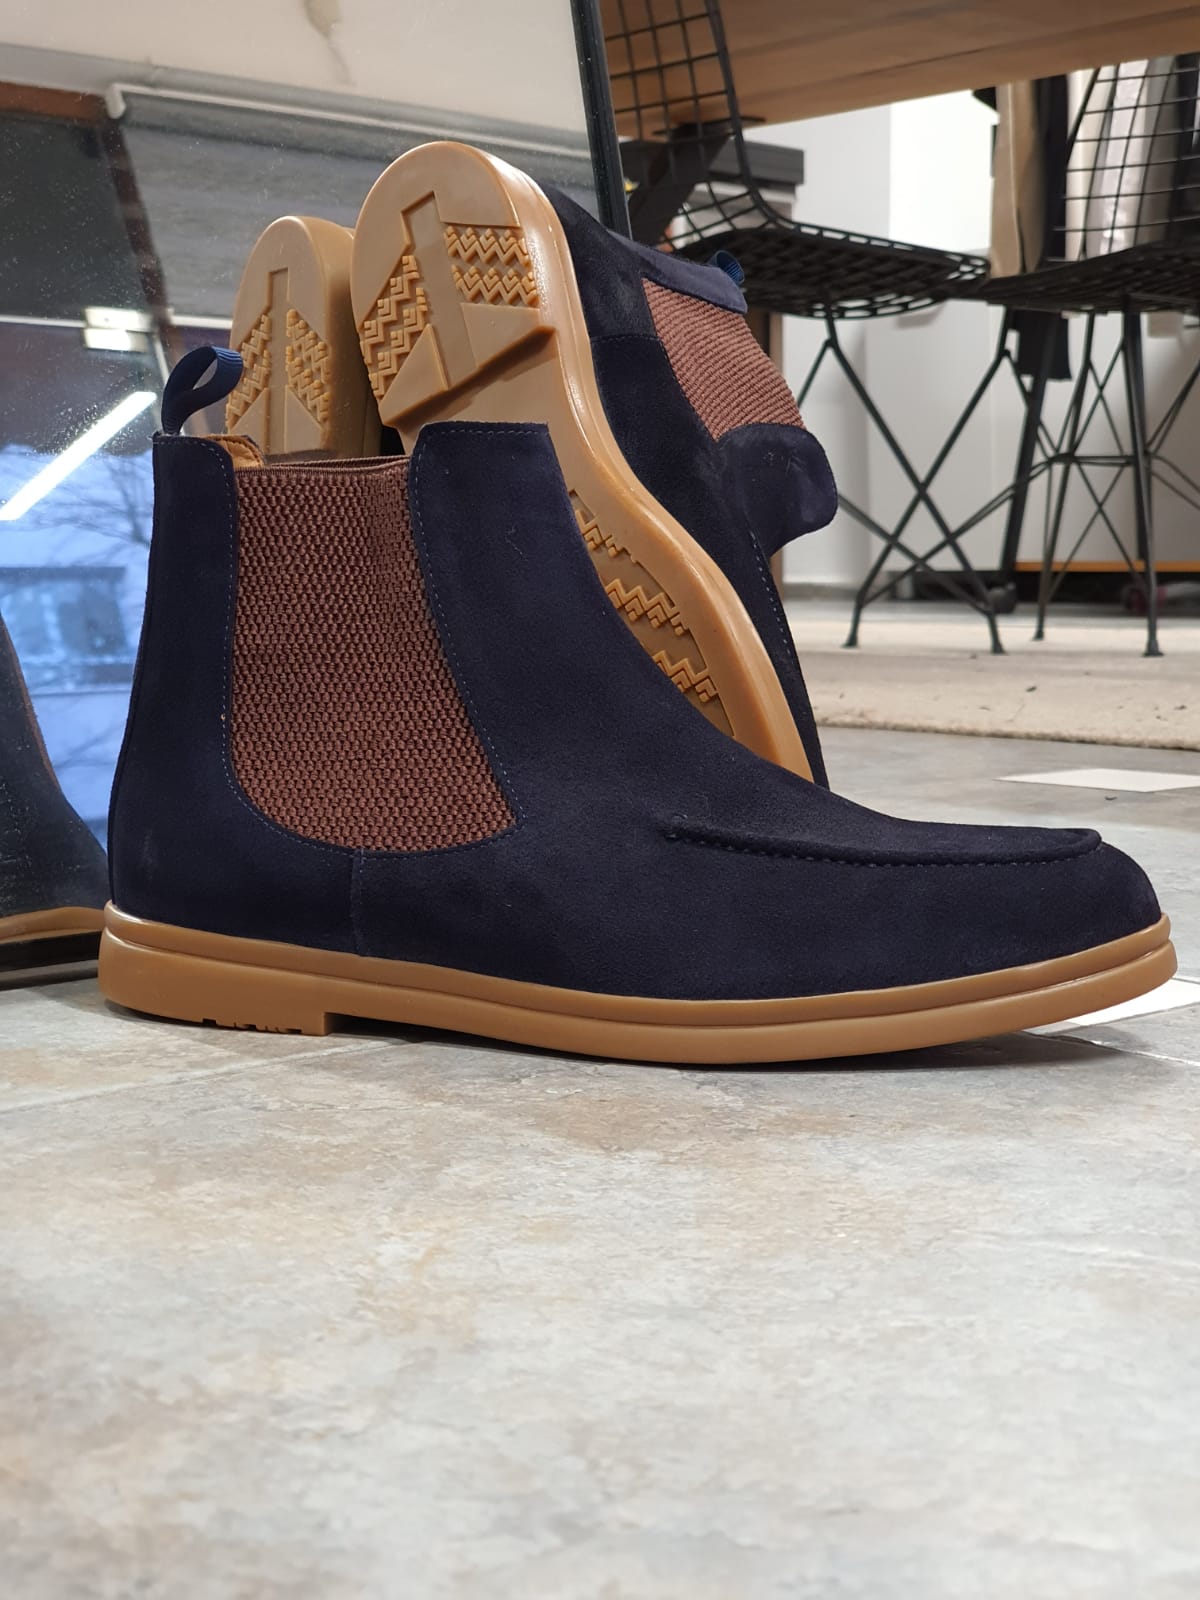 SARDINELLI NAVYBLUE SUEDE SPECIAL PRODUCTION* CALF LEATHER BOOTS